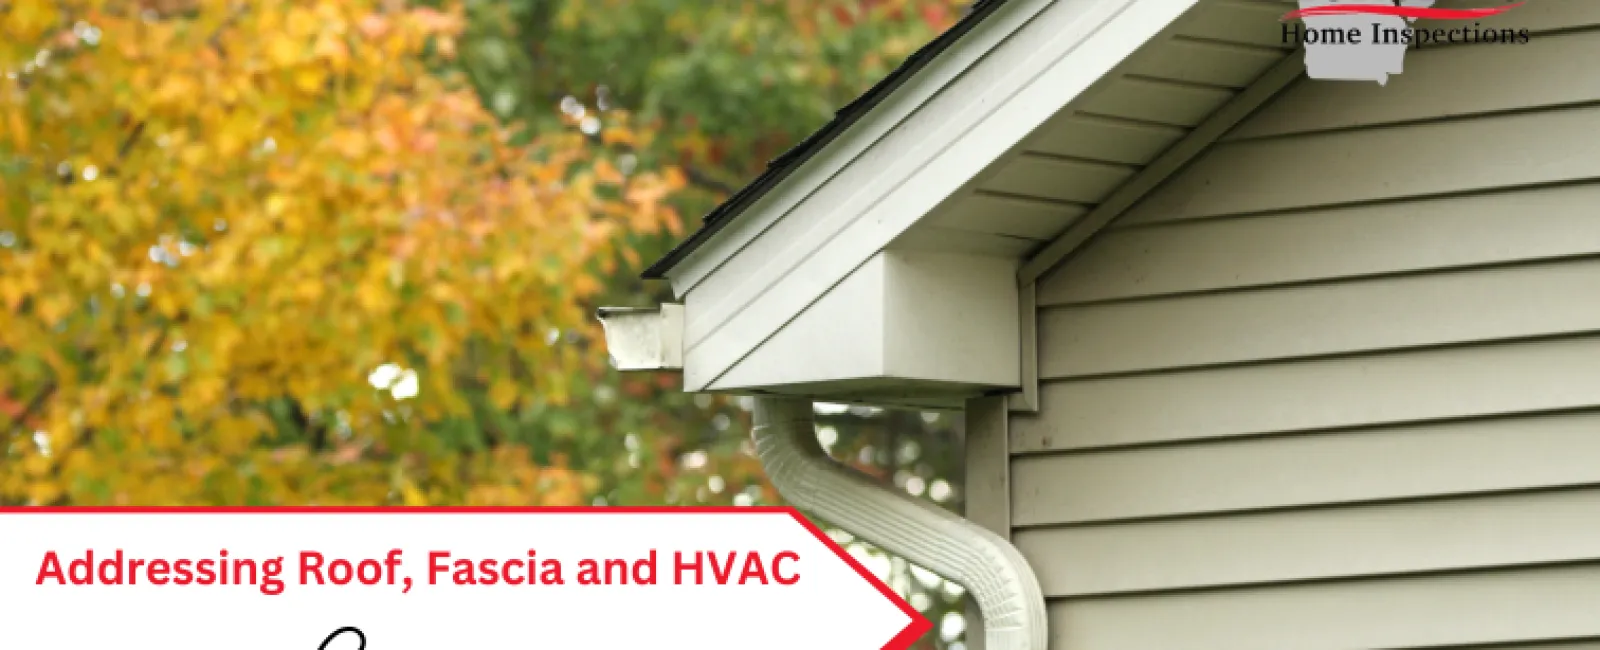 Addressing Roof, Fascia, and HVAC Concerns in Inspections